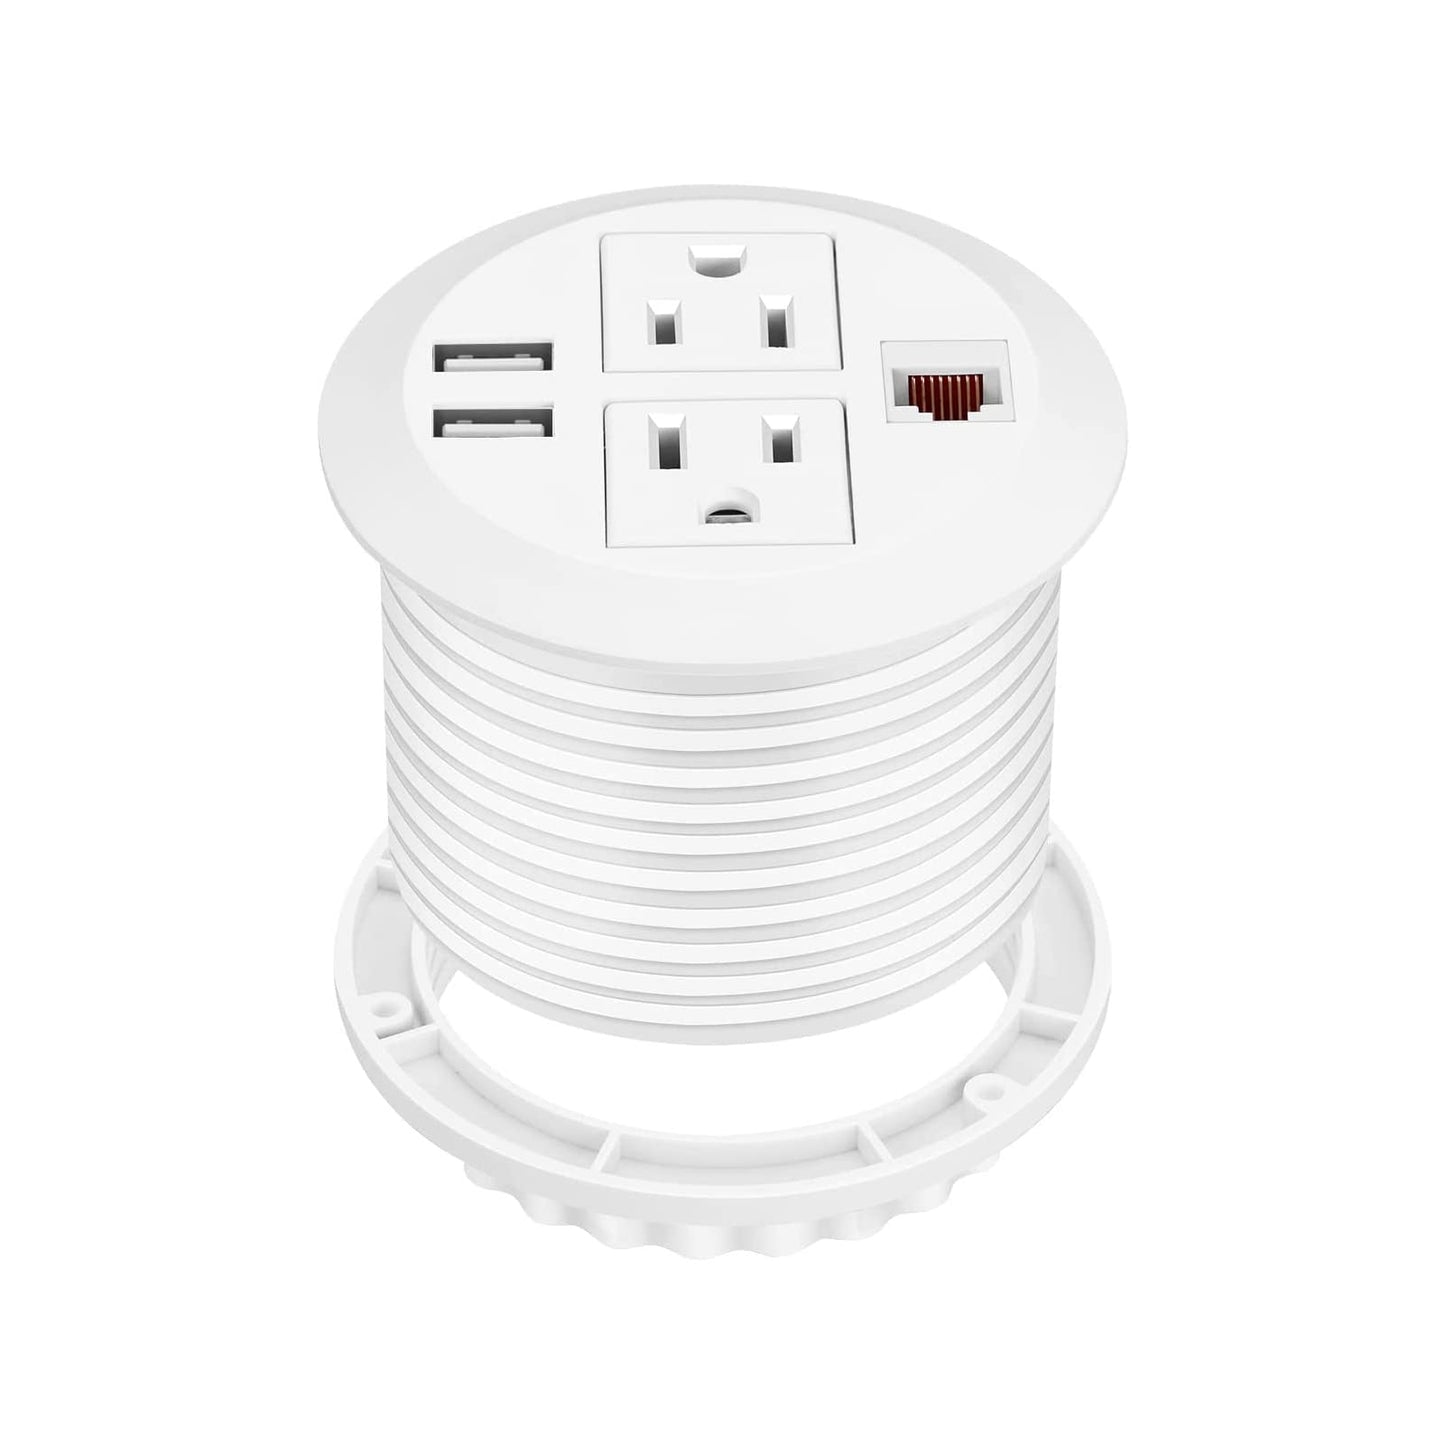 Recessed Desk Outlet with 2USB, 2 AC, 1 Network RJ45 Port